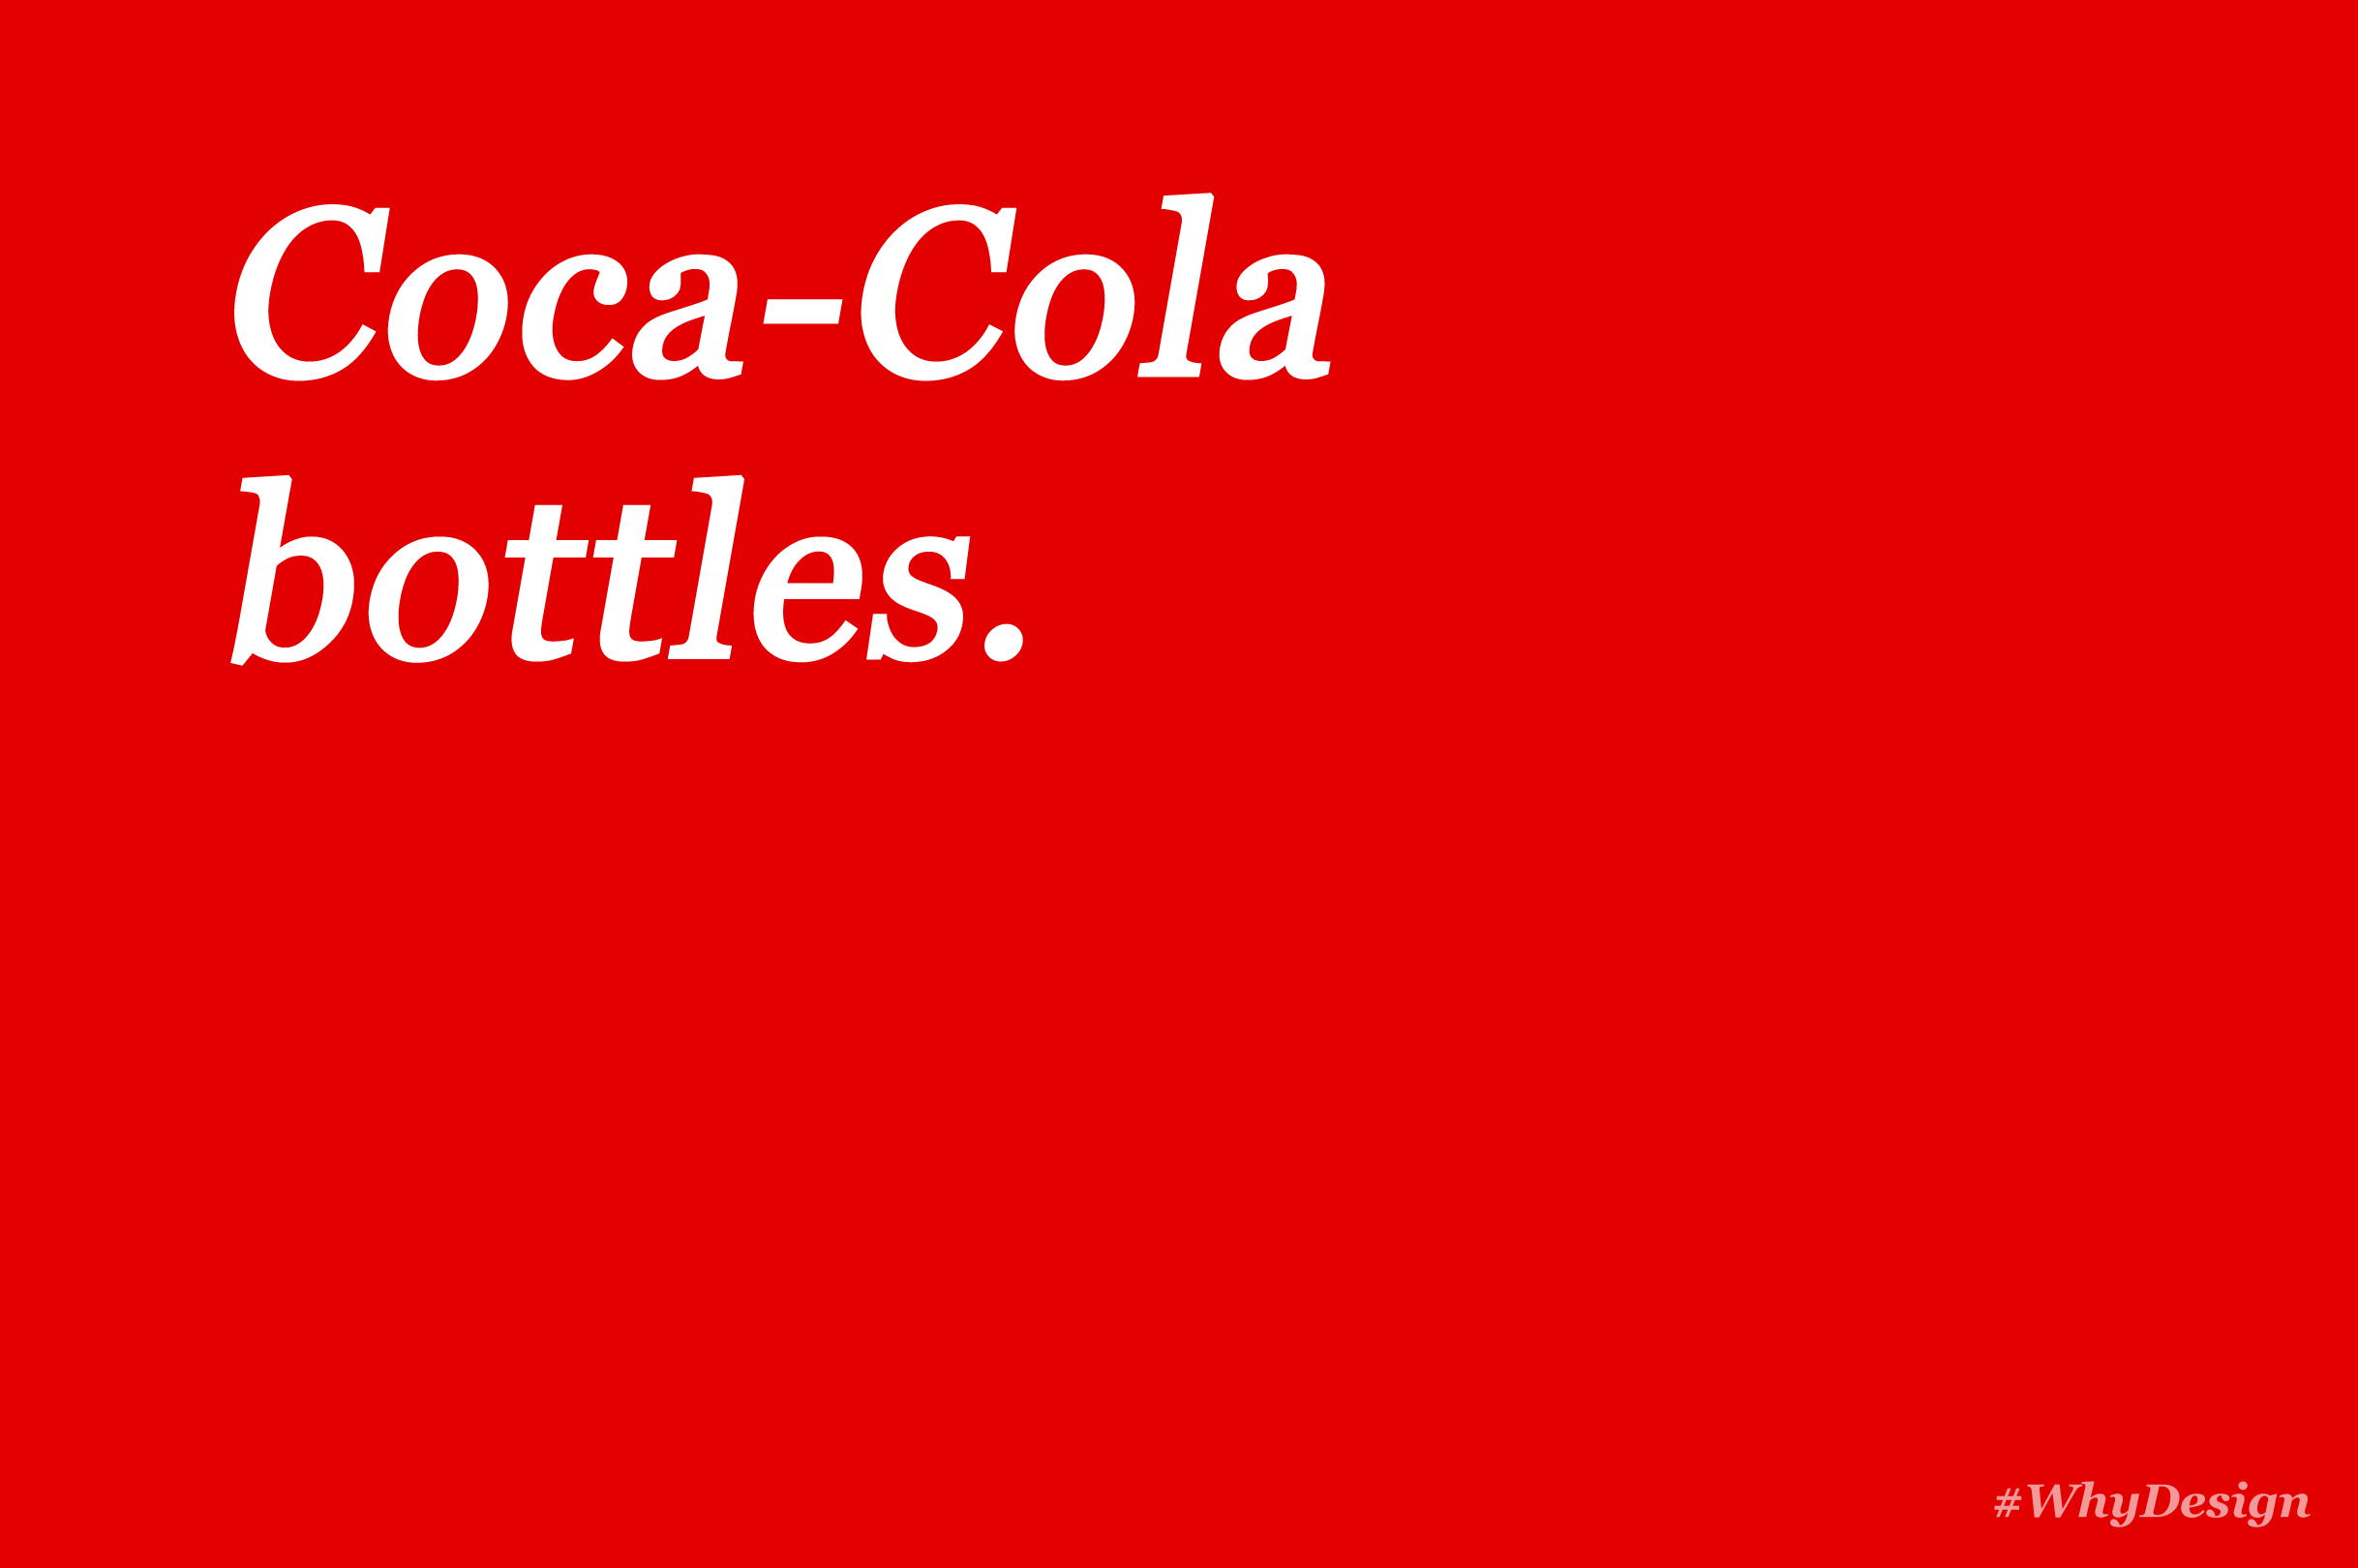 design-is-why-coca-cola-bot